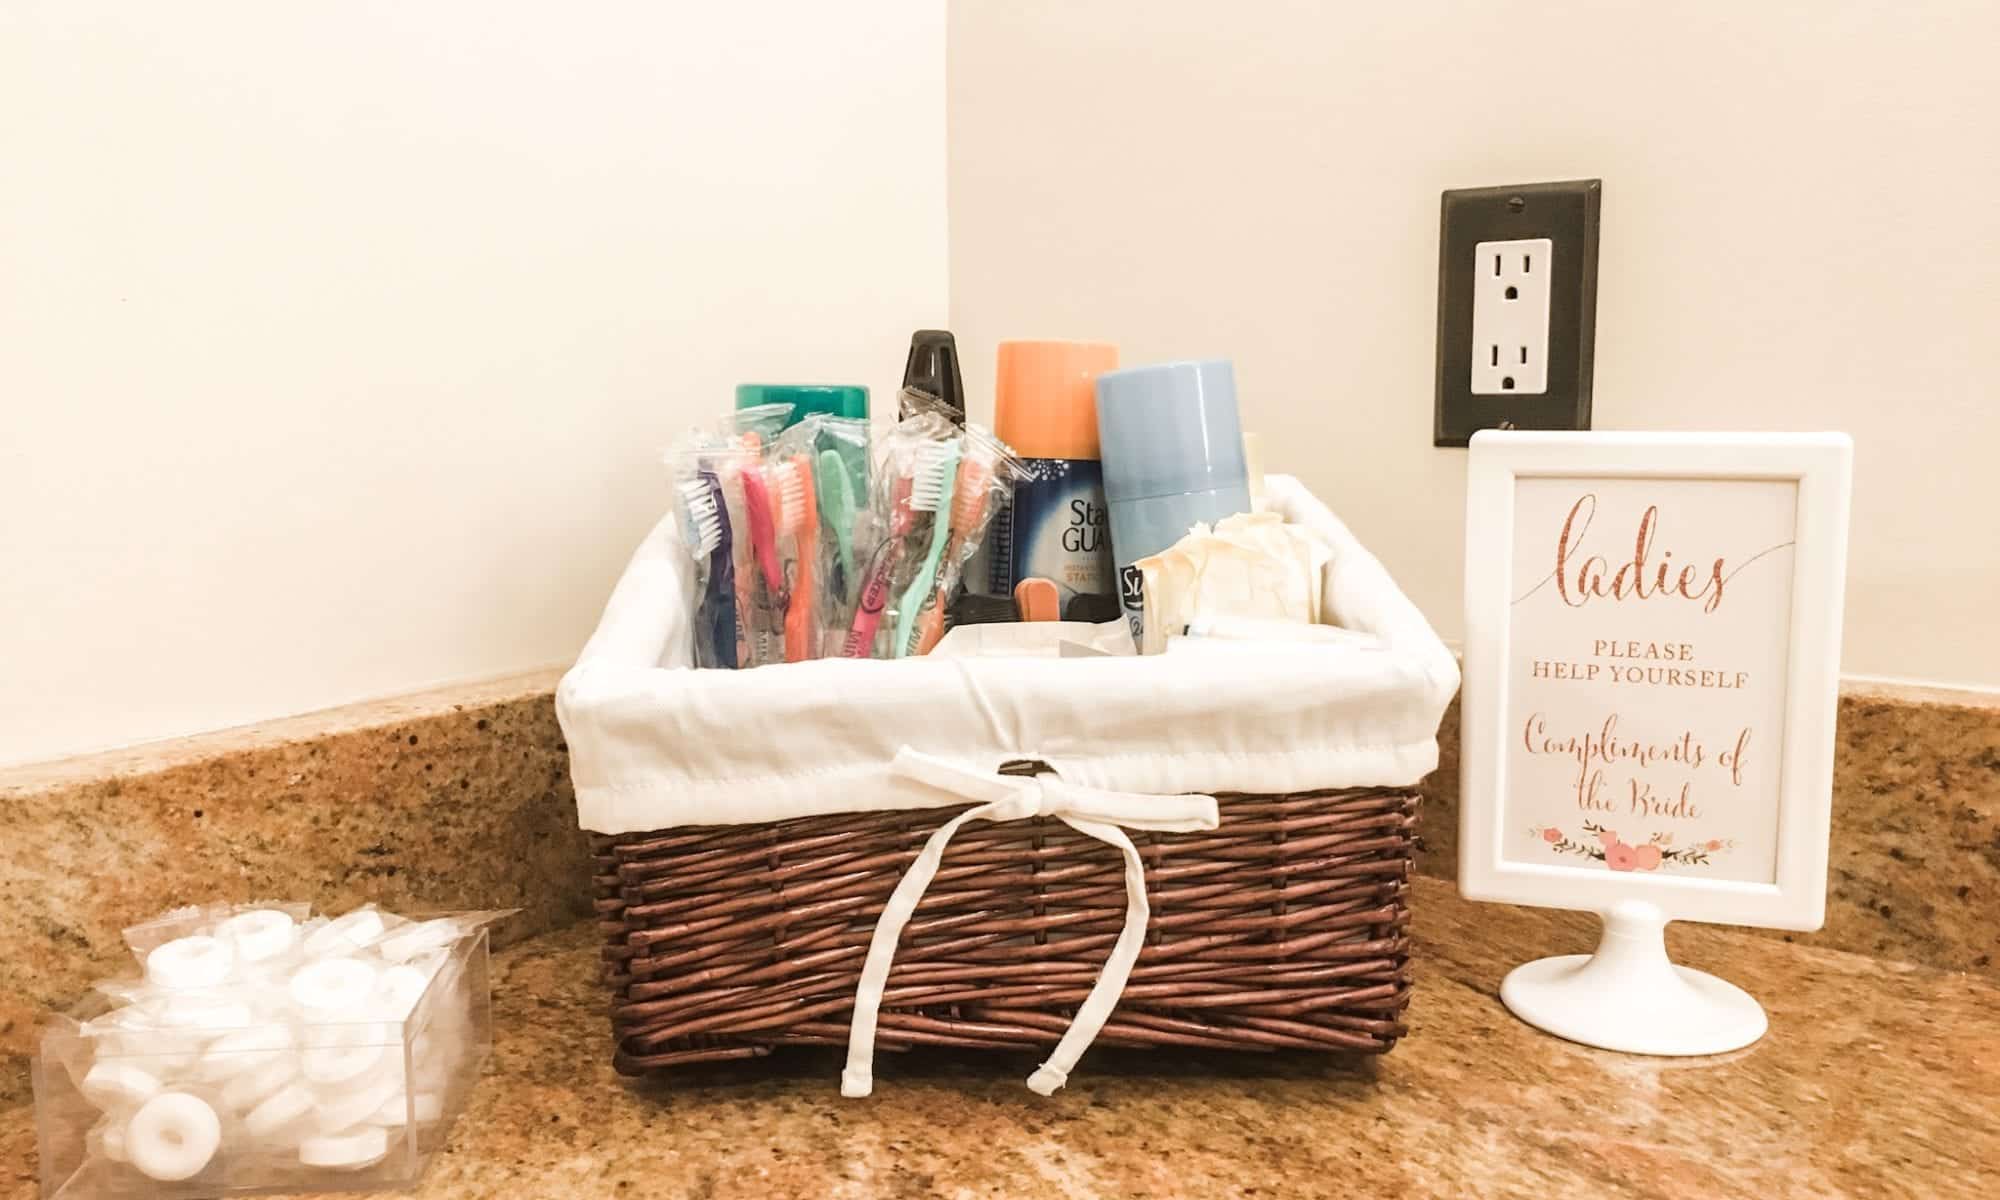 What to Include in Your Bathroom Baskets